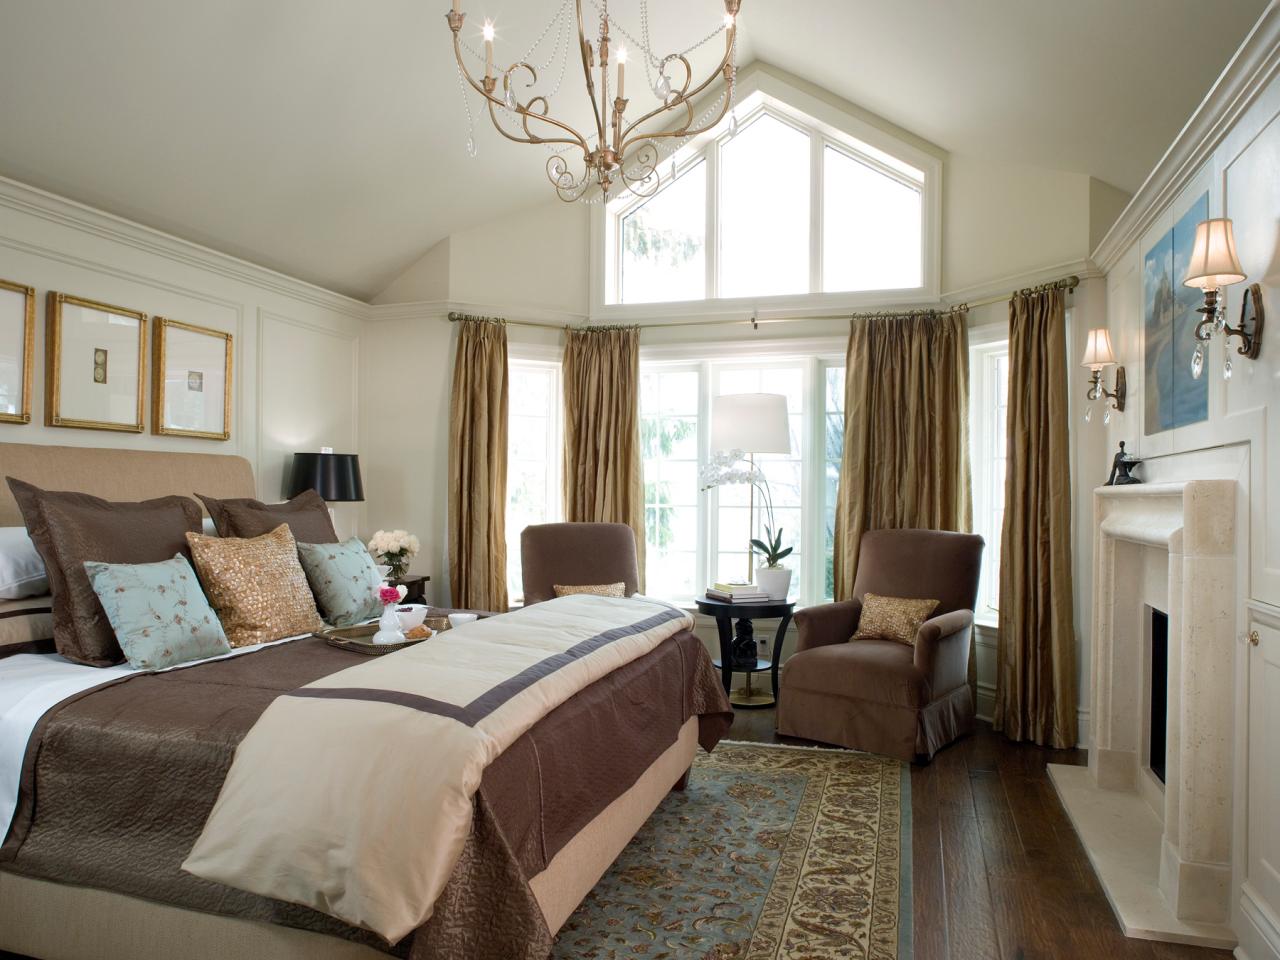 10 Divine Master Bedrooms by Candice Olson  Bedrooms 